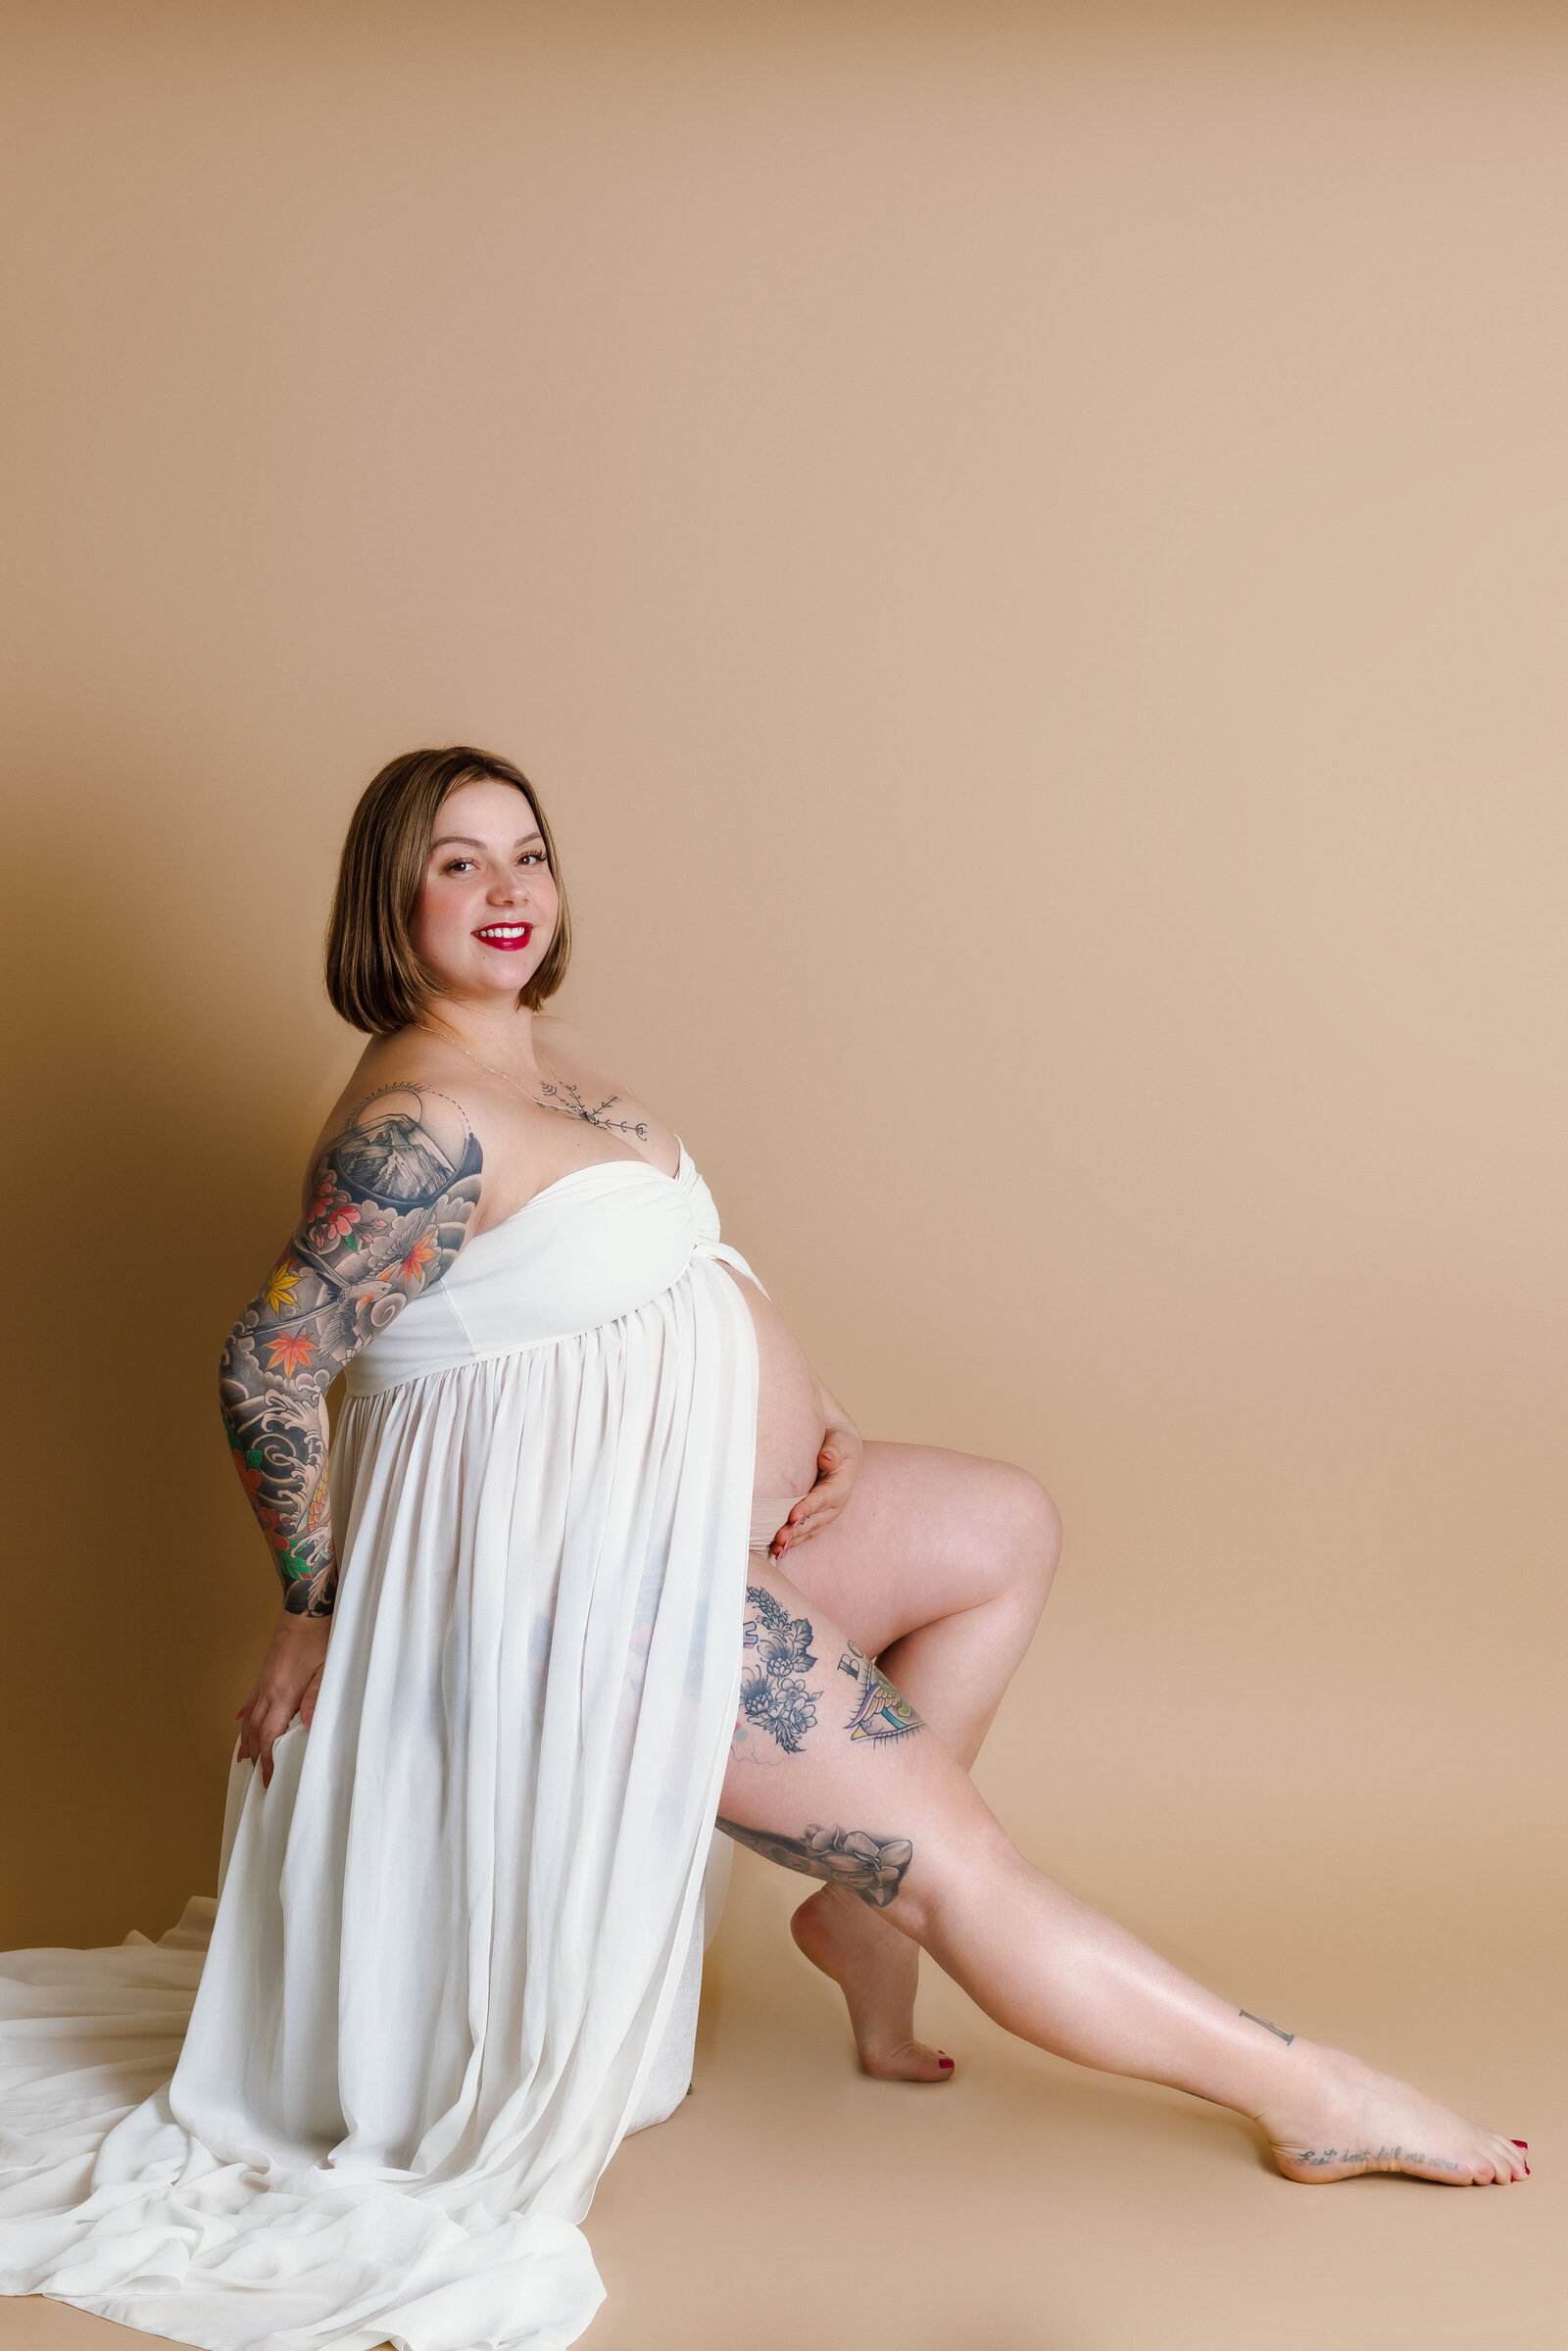 Maternity Photographer, a woman has her belly exposed and tattoos on her skin, she is pregnant